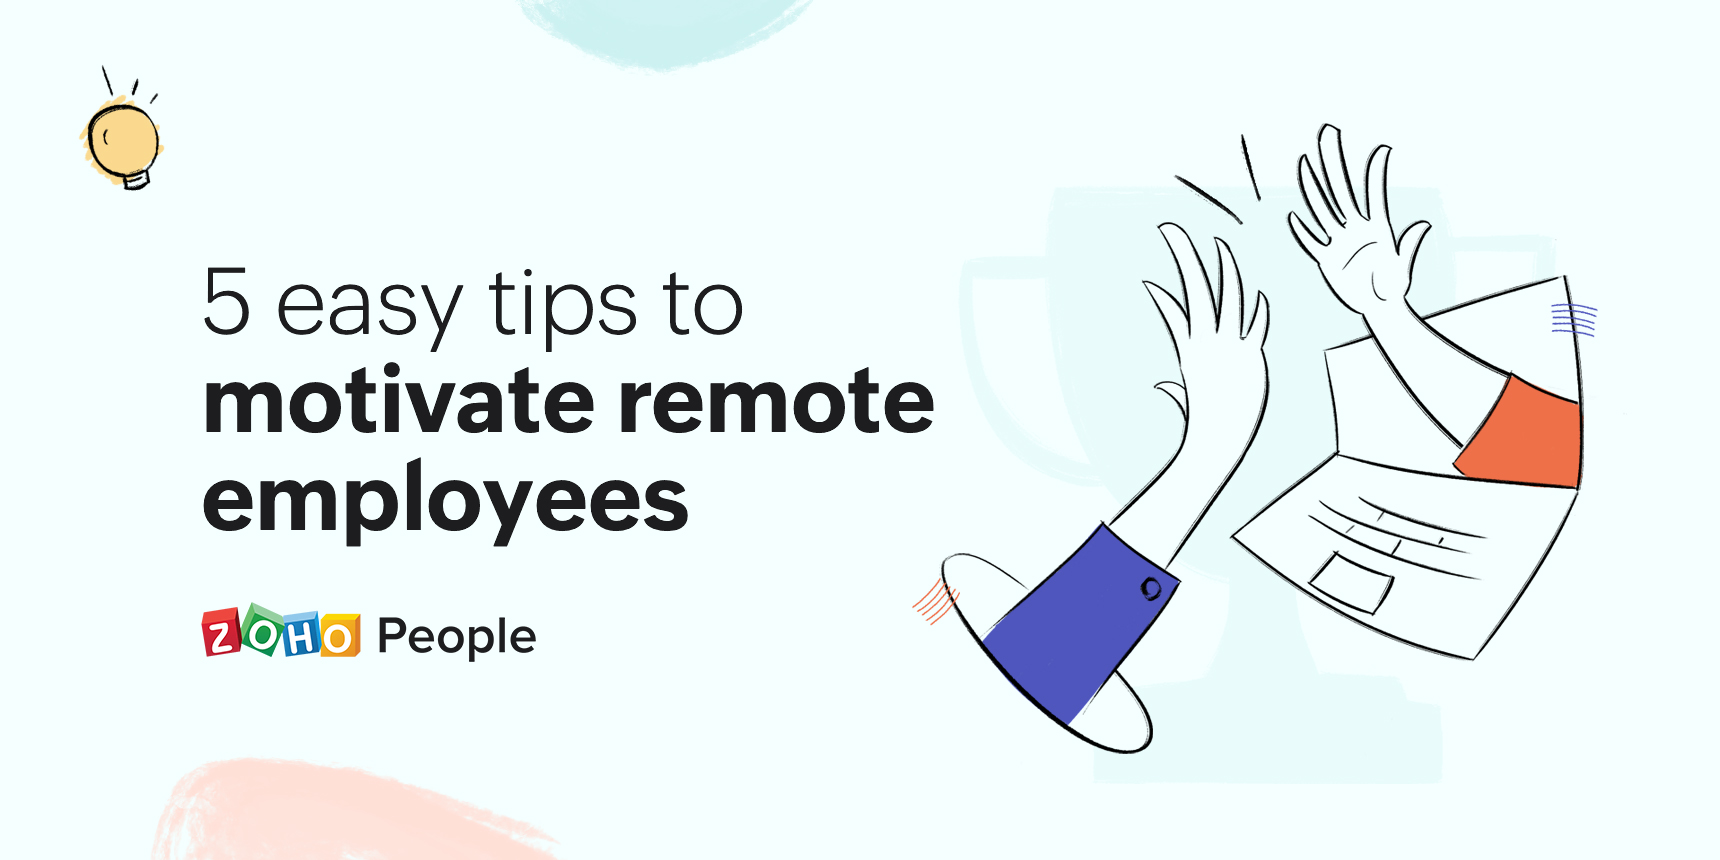 5 simple ways to motivate remote employees